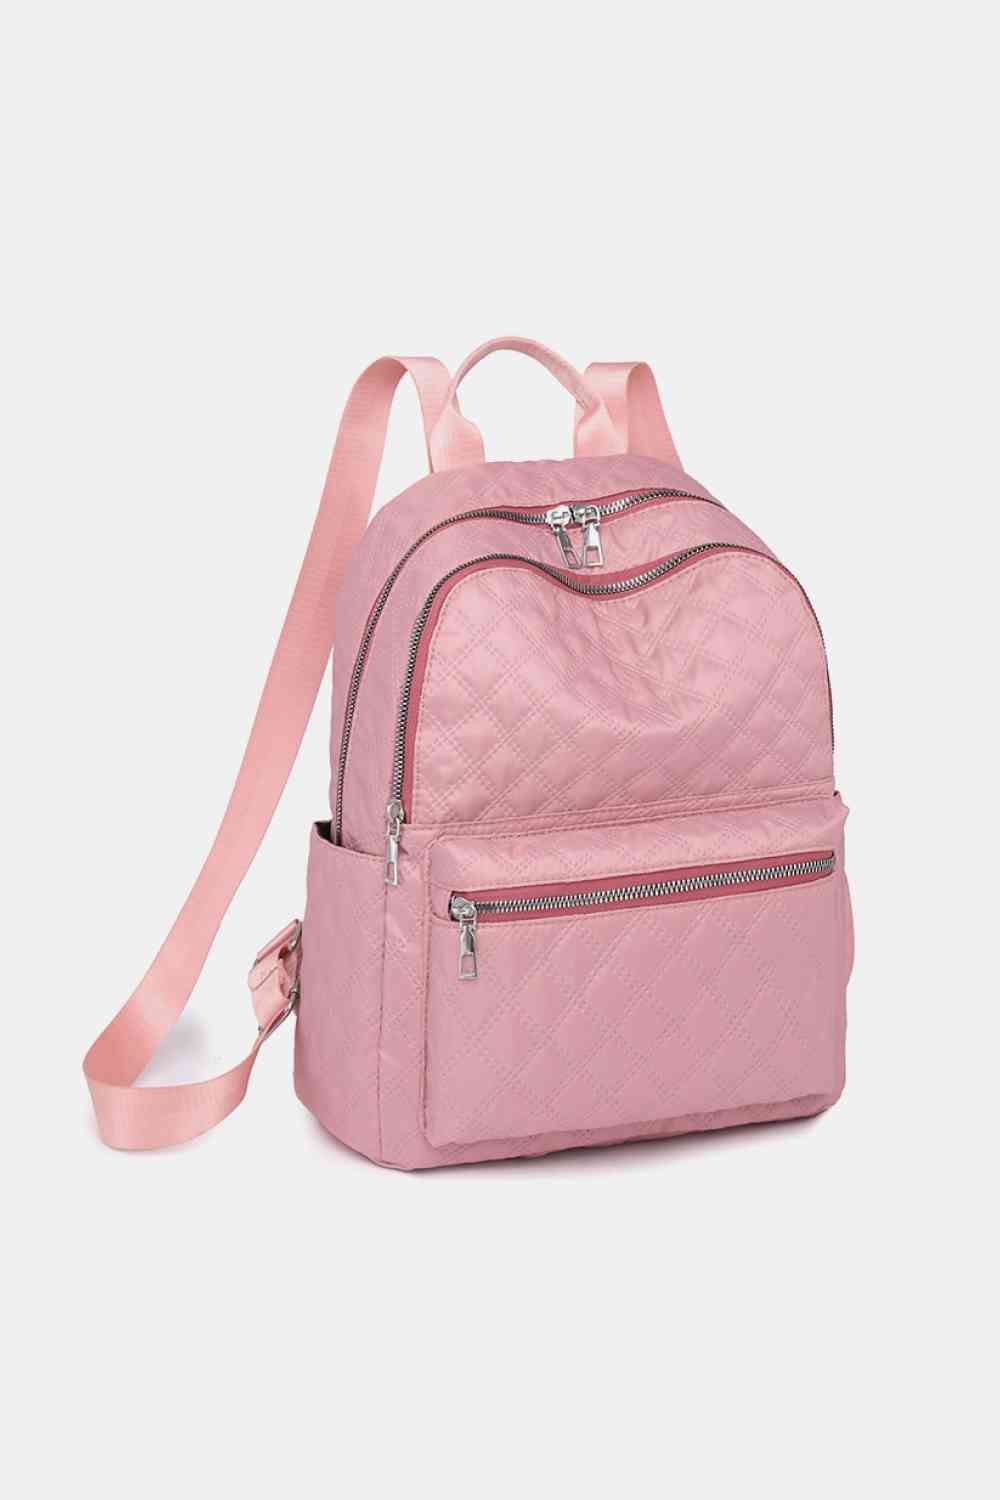 Medium Polyester Backpack - ChicaLux